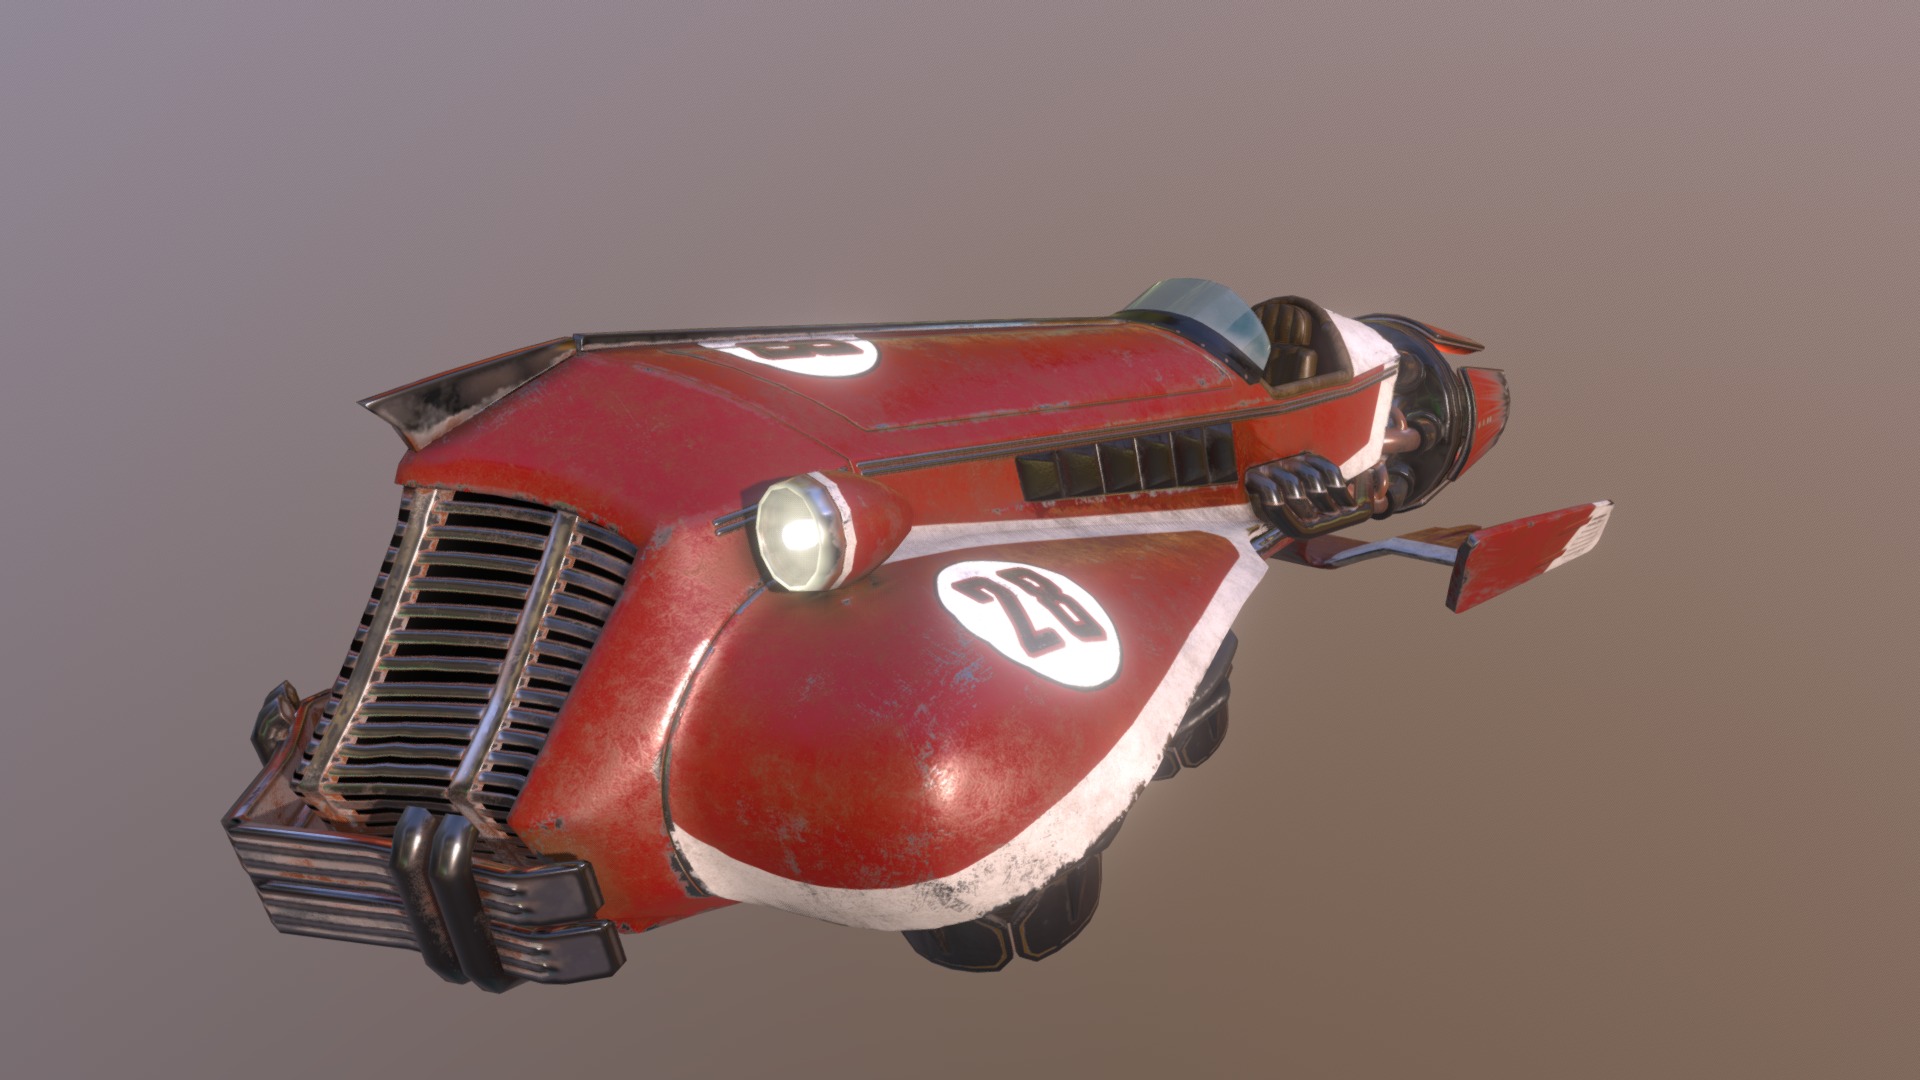 3D model Vintage Hover Racer - This is a 3D model of the Vintage Hover Racer. The 3D model is about a red and black toy airplane.